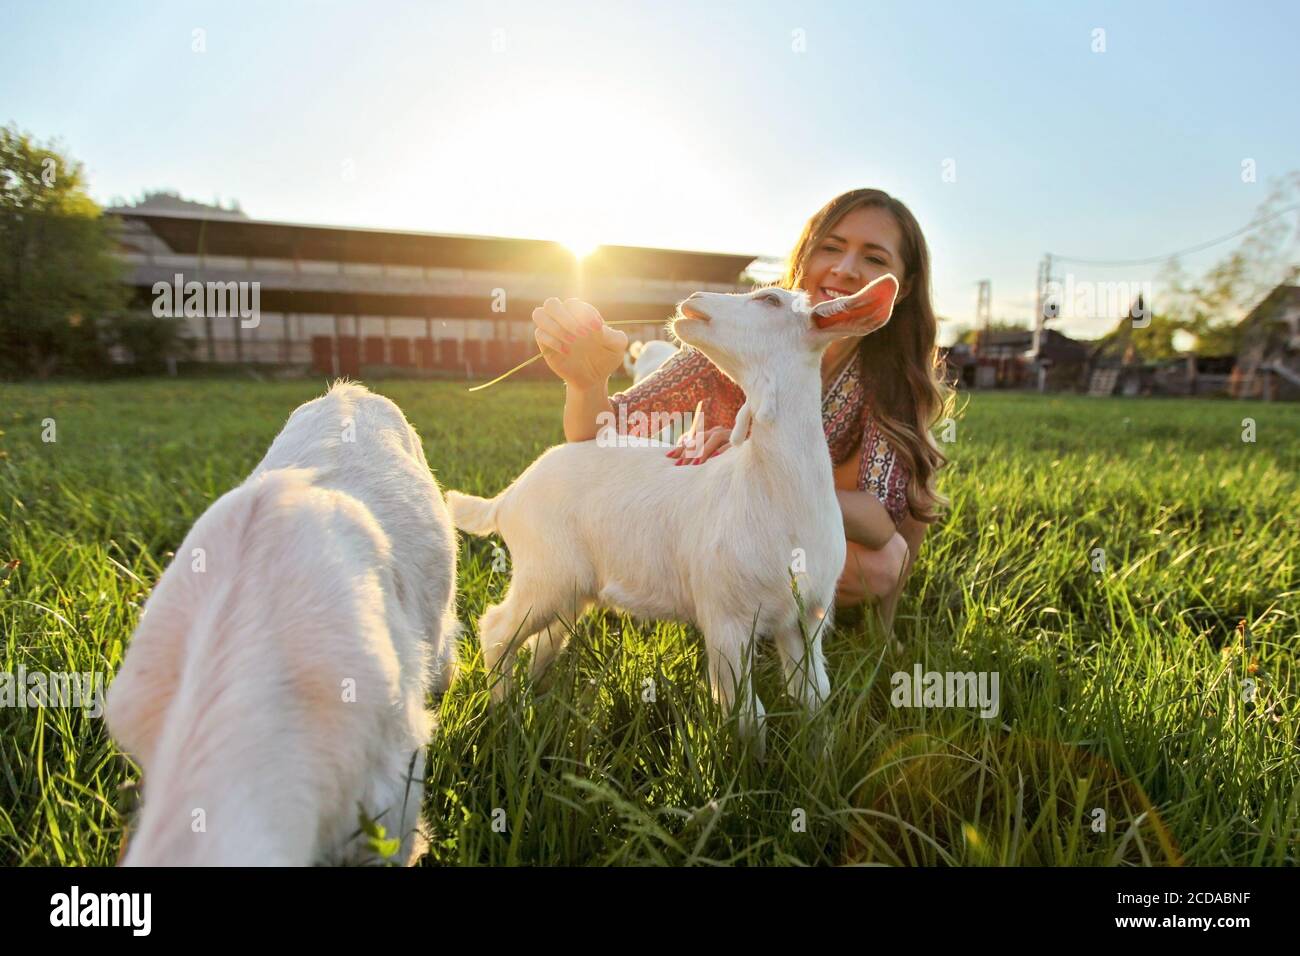 Young woman feeding grass to goat kids, smiling, wide angle photo with strong backlight and sun over farm in background Stock Photo